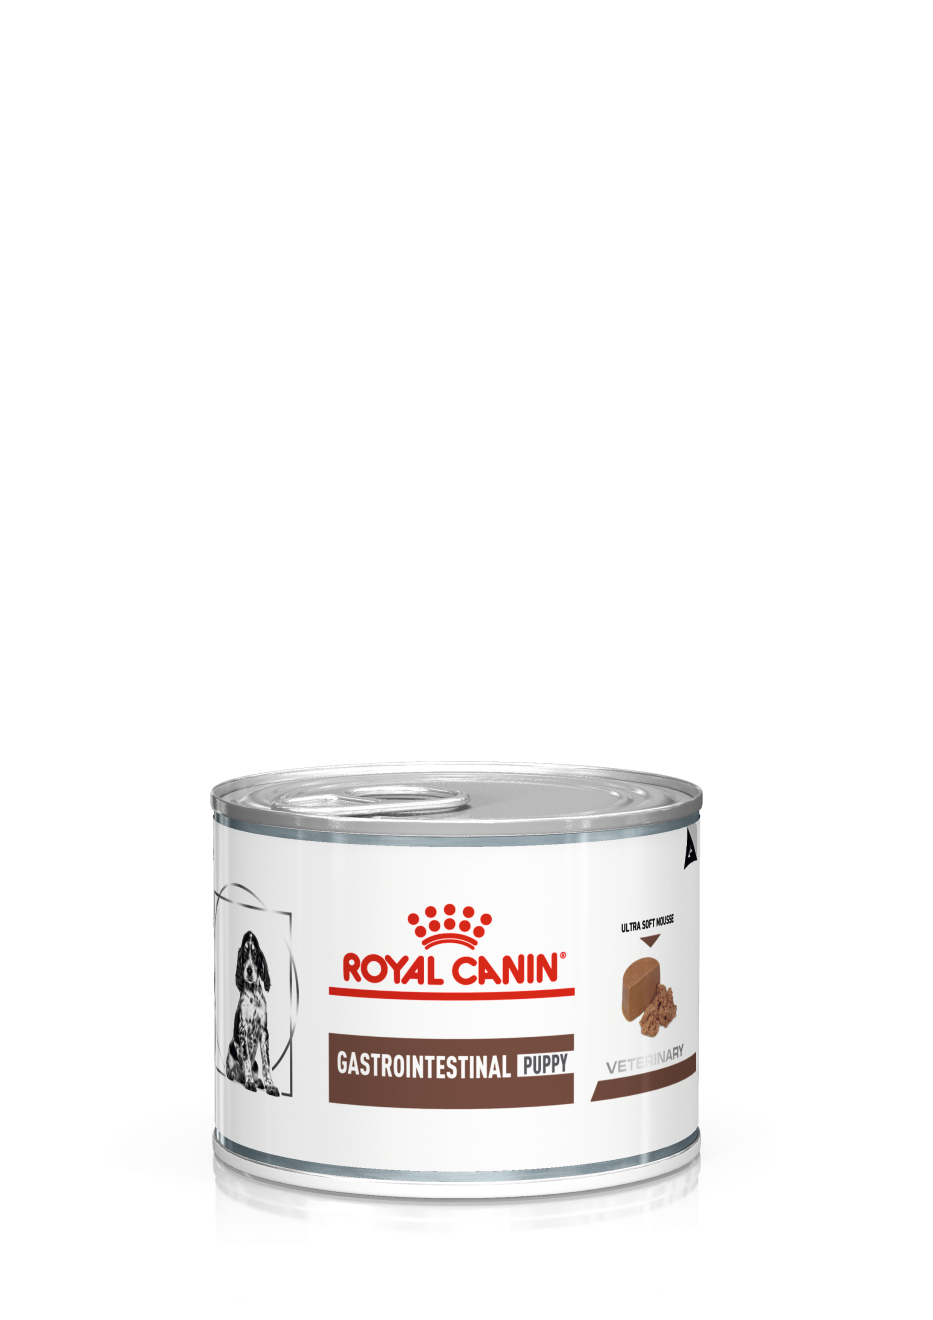 VHN-GASTROINTESTINAL PUPPY DOG CAN MOUSSE-PACKSHOT_rc-psd-png-2000×1320-150-RGB